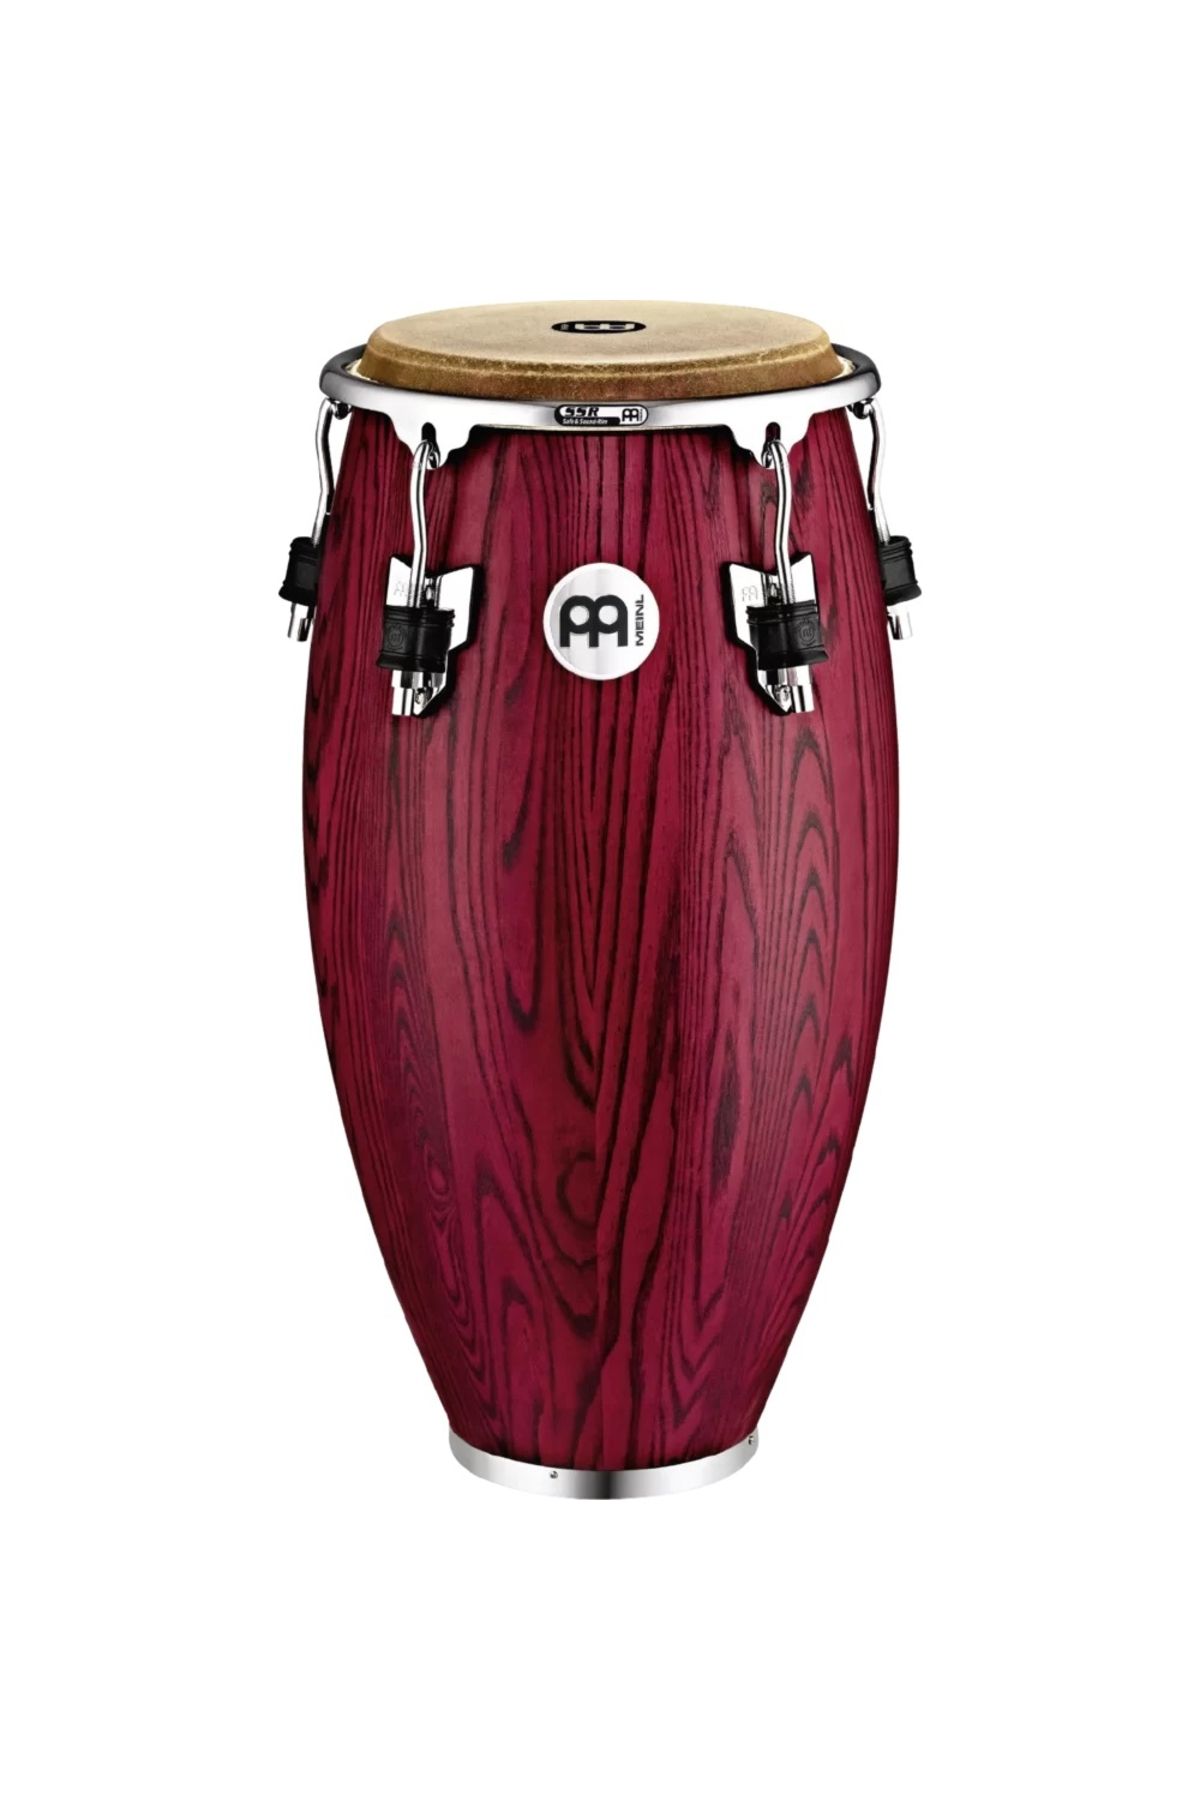 MEINL WCO11VR-M Woodcraft Series 11" Quinto Conga (Vintage Red)